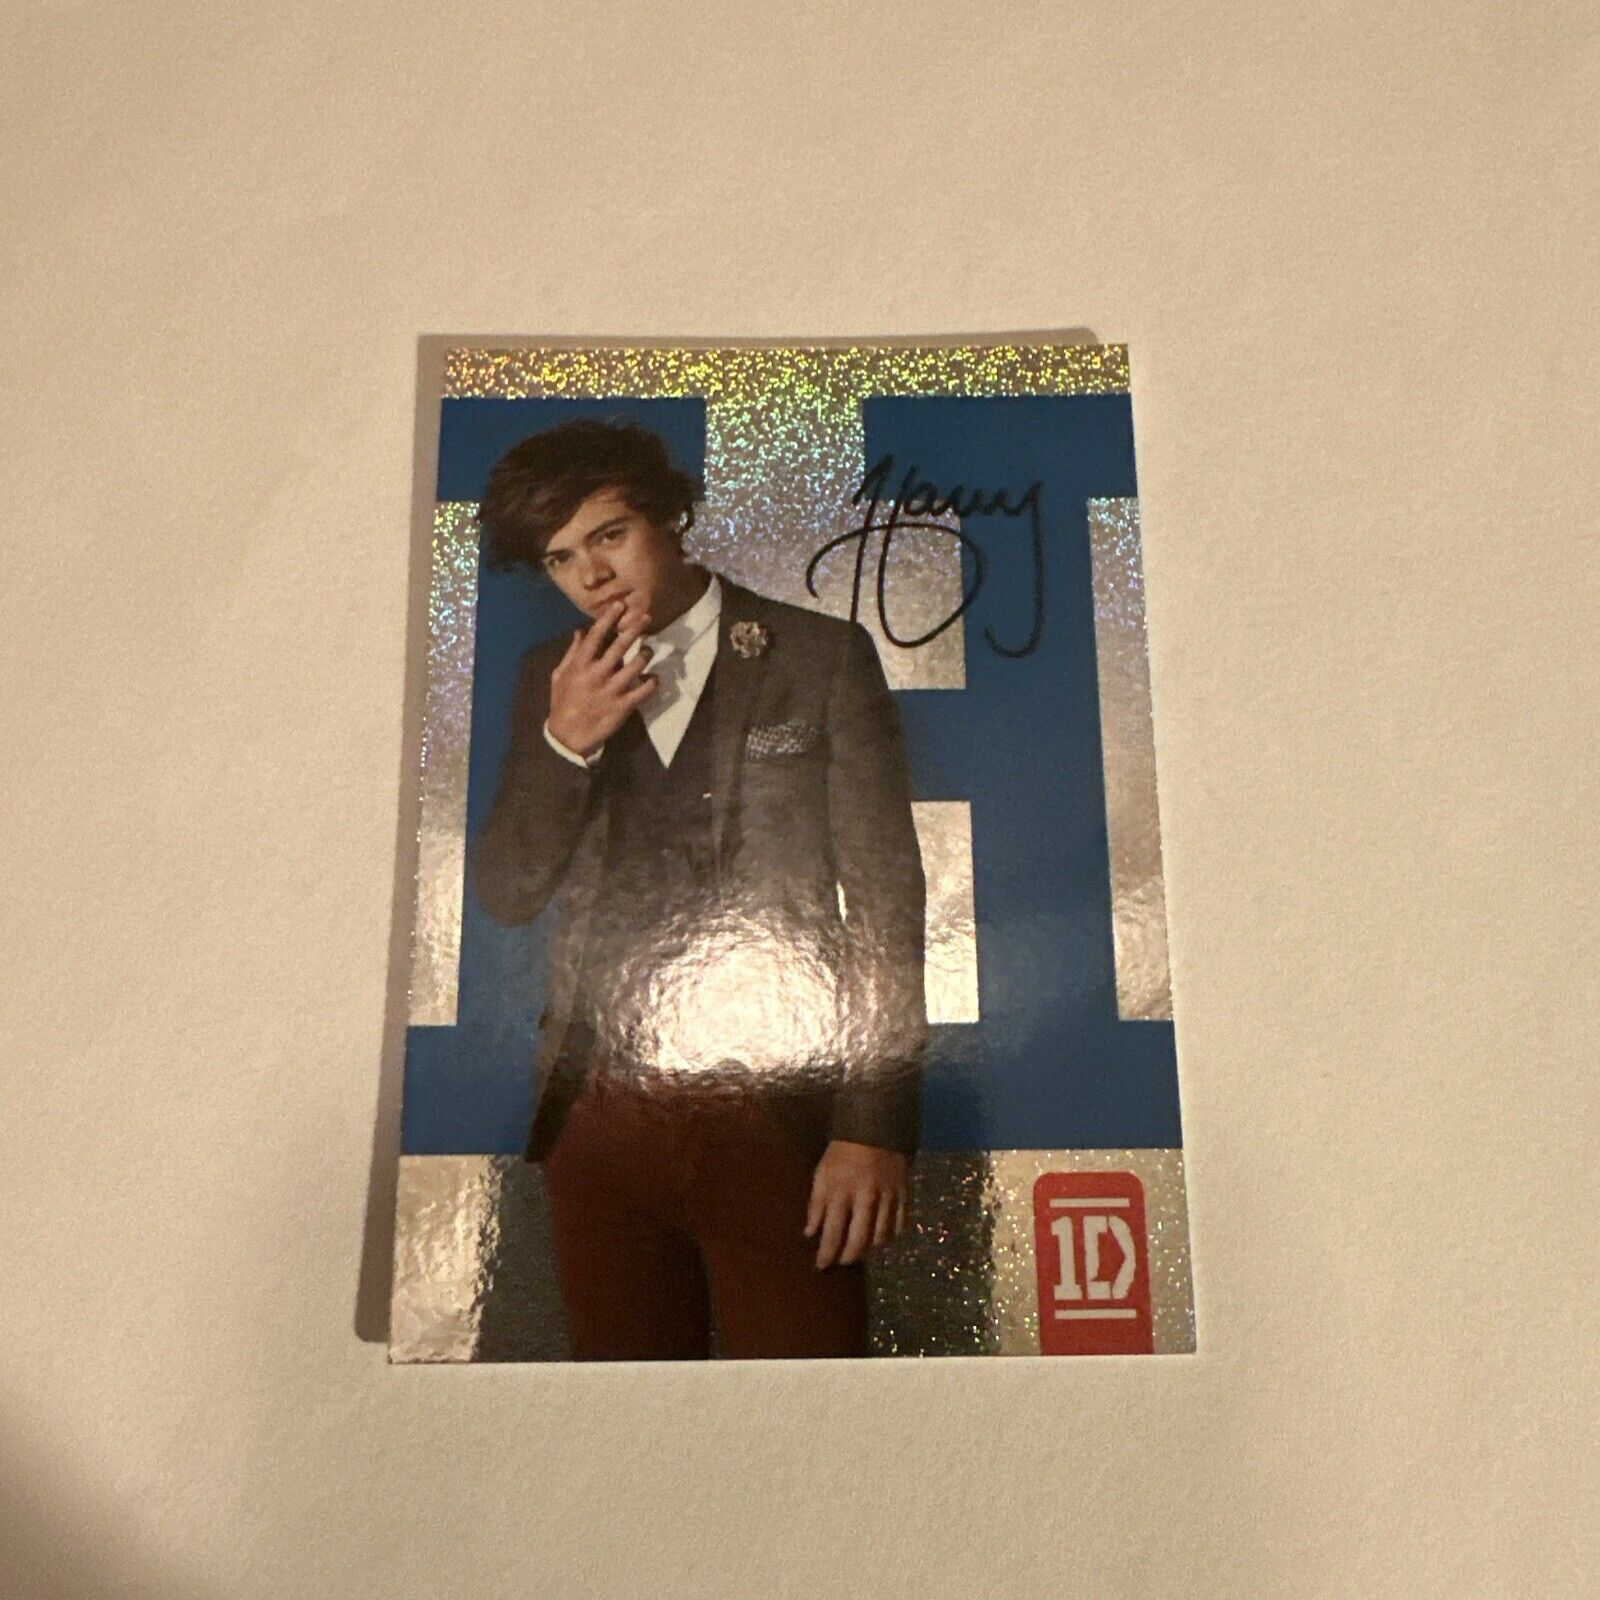 2013 Panini One Direction Harry Styles #1 Stardust Spellbound Trading Card